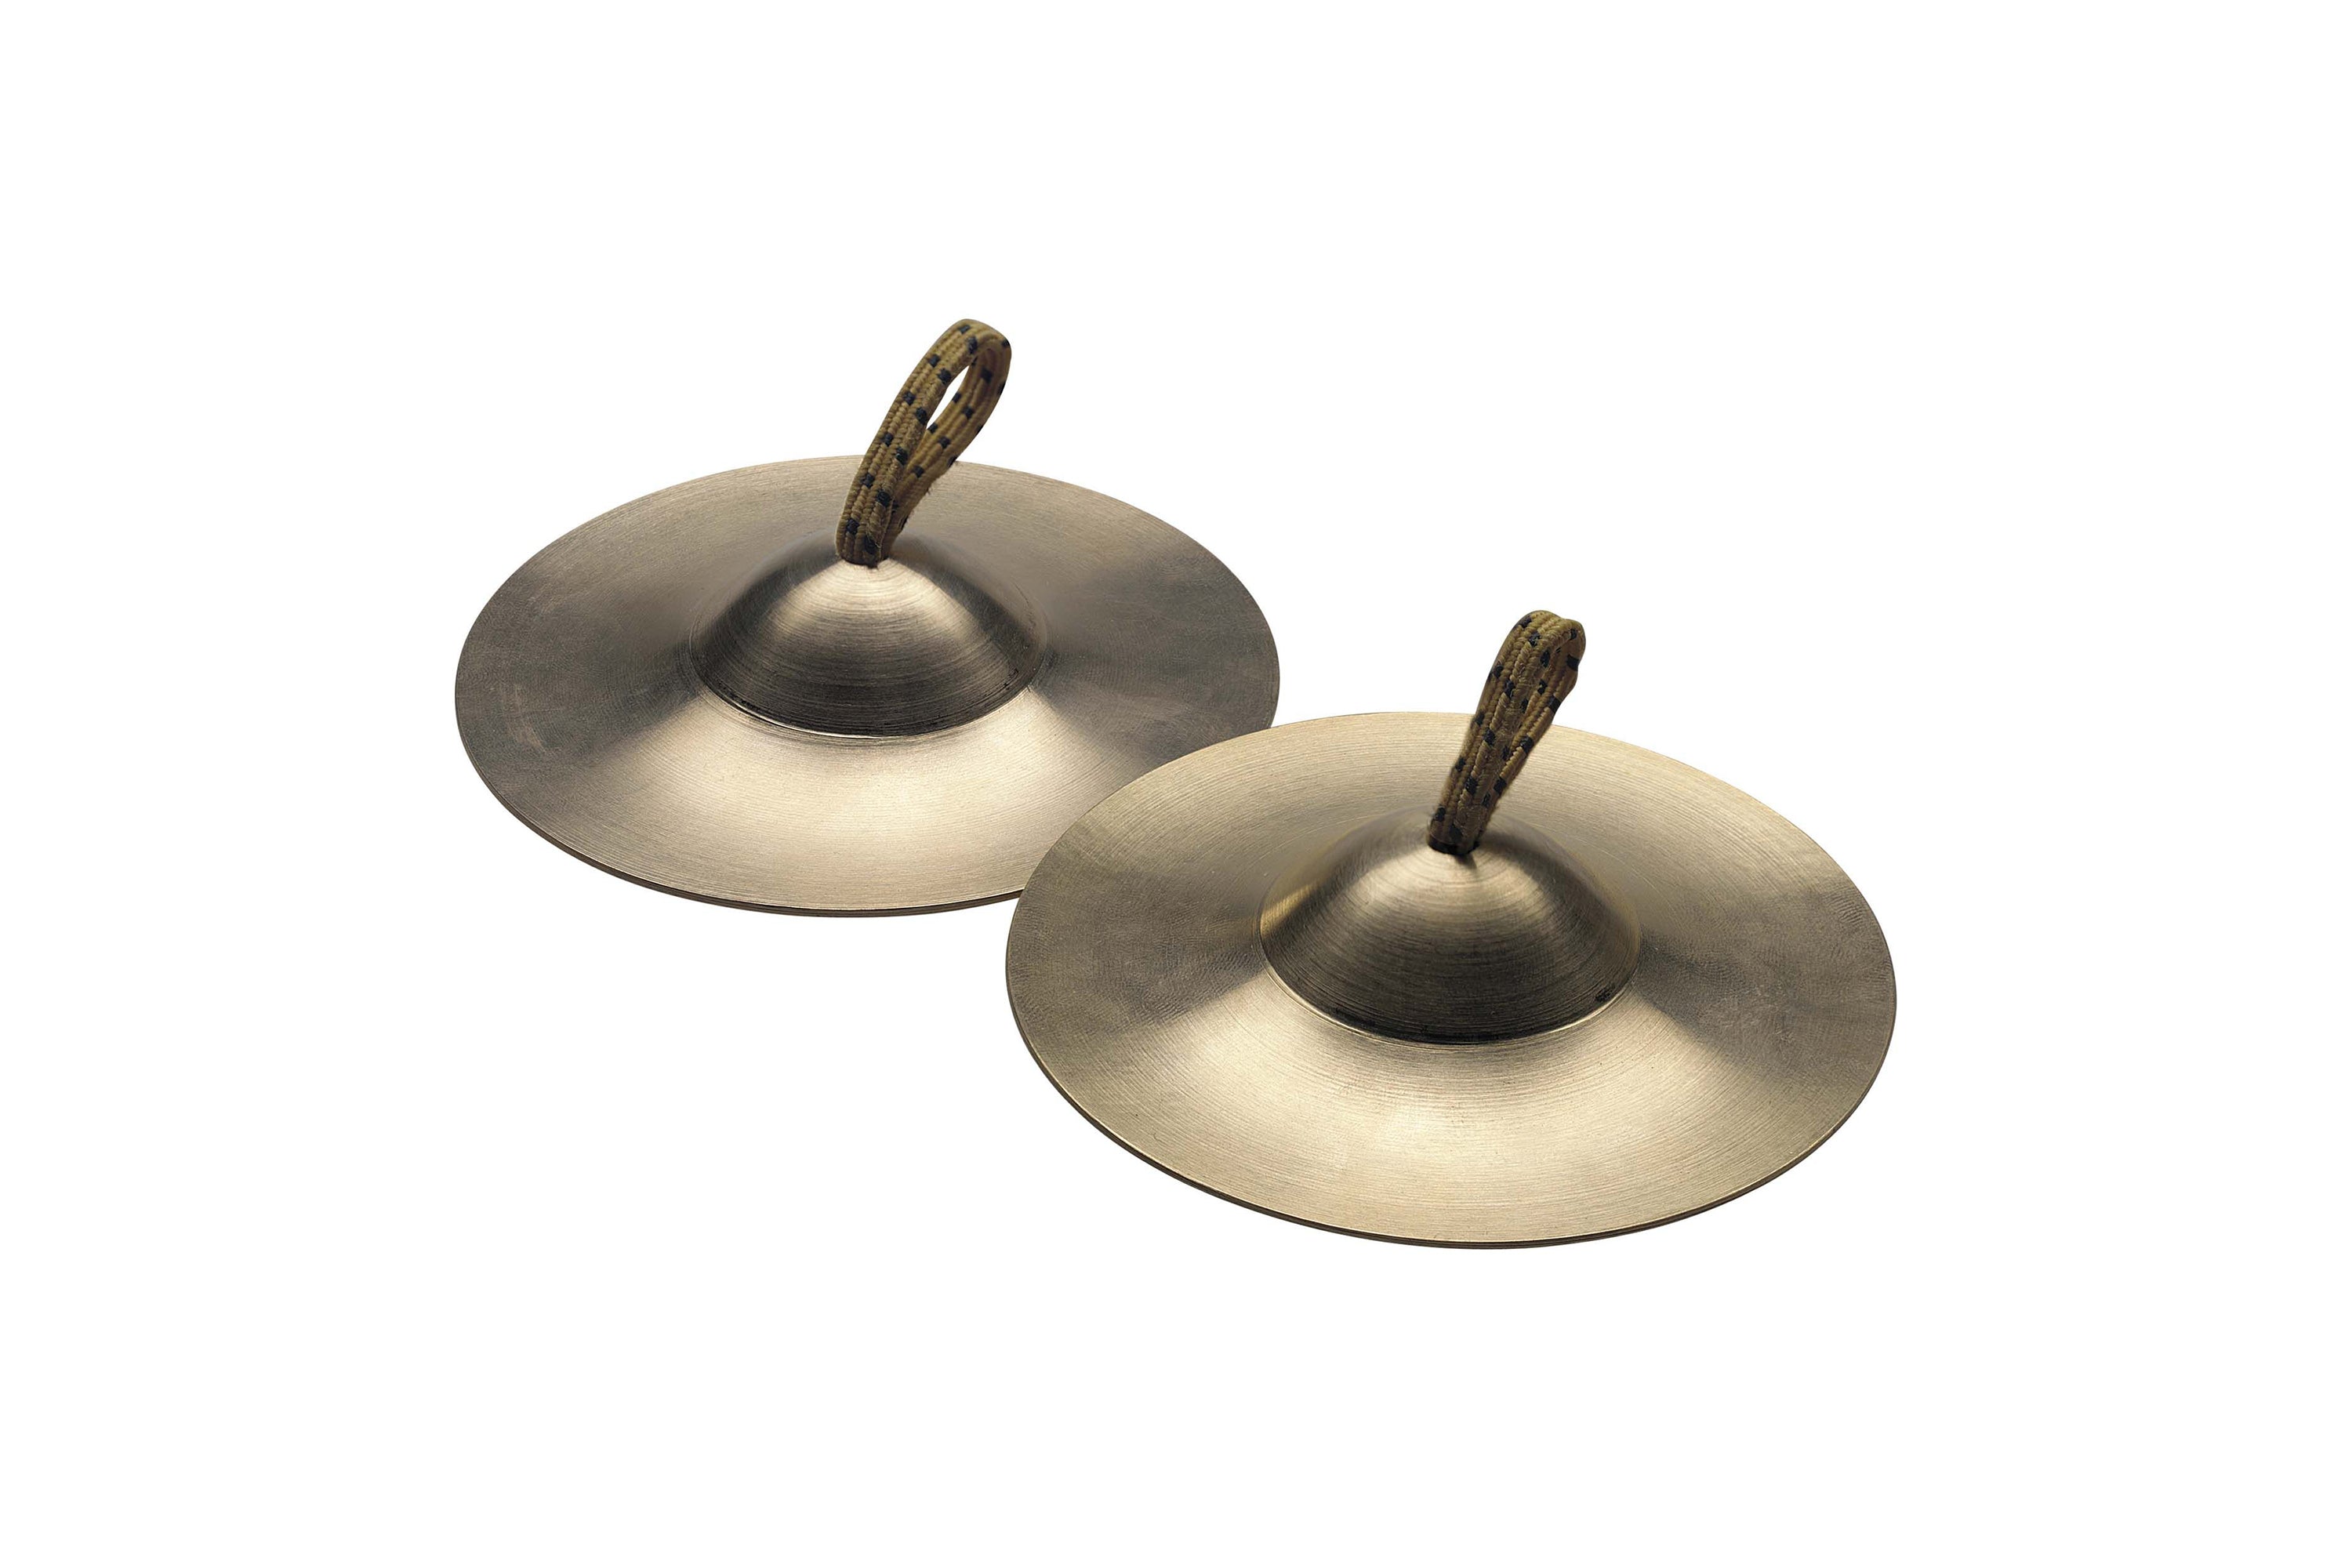 Stagg FCY-9 Finger Cymbal Pair - Bronze 9cm